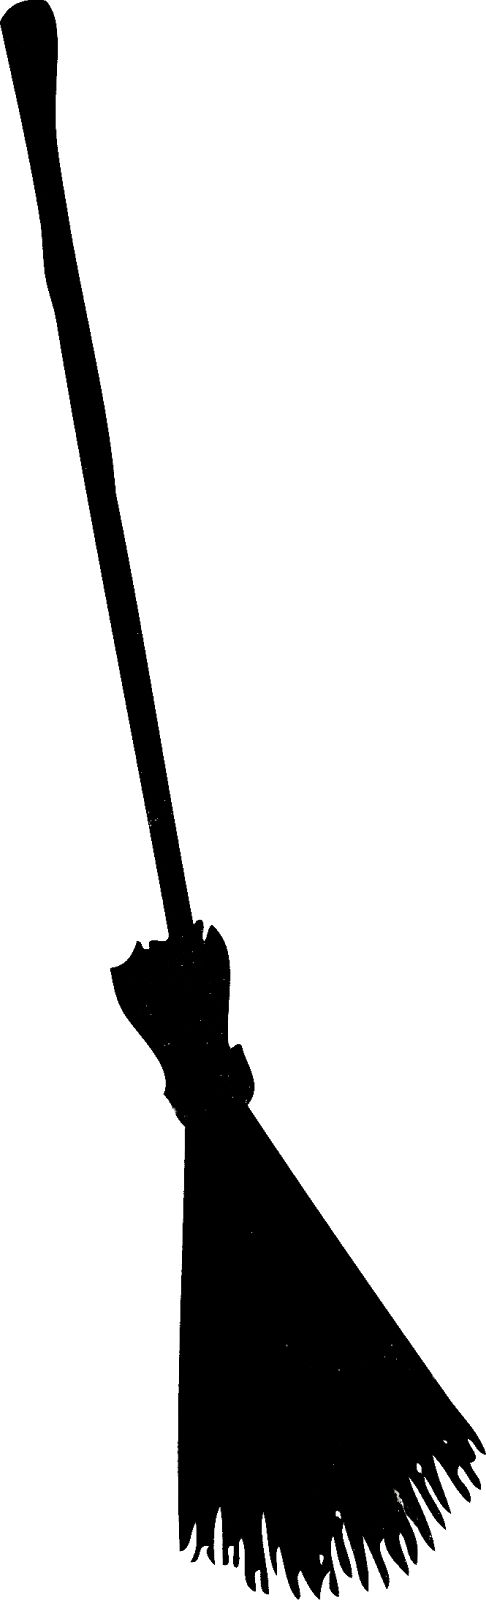 Free witches cliparts download. Witch clipart broom silhouette